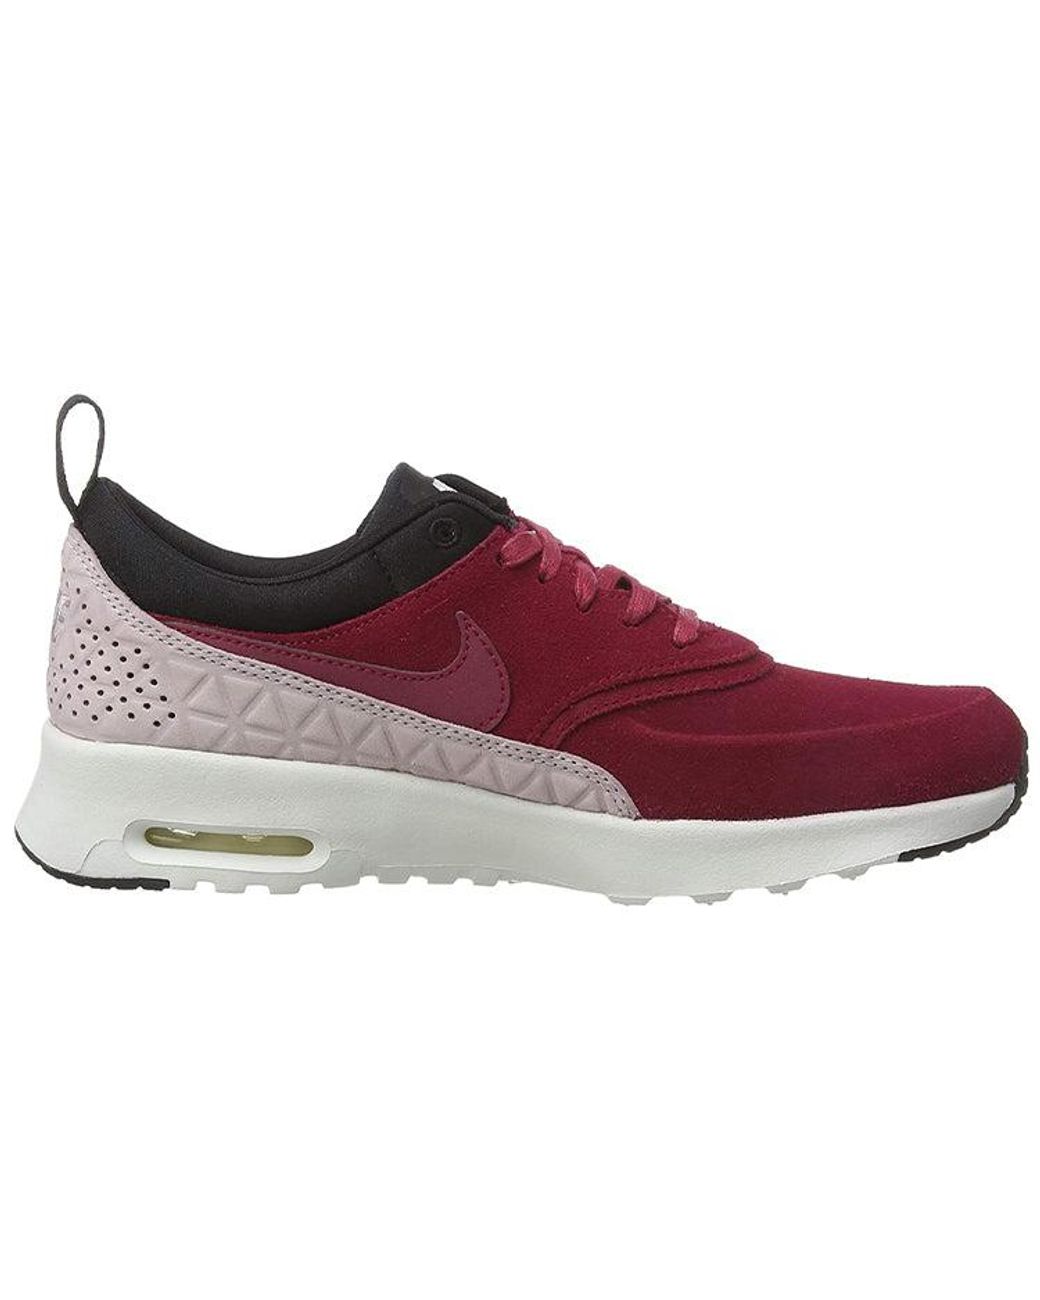 Nike Air Max Thea Prm Lth 'noble Red' | Lyst